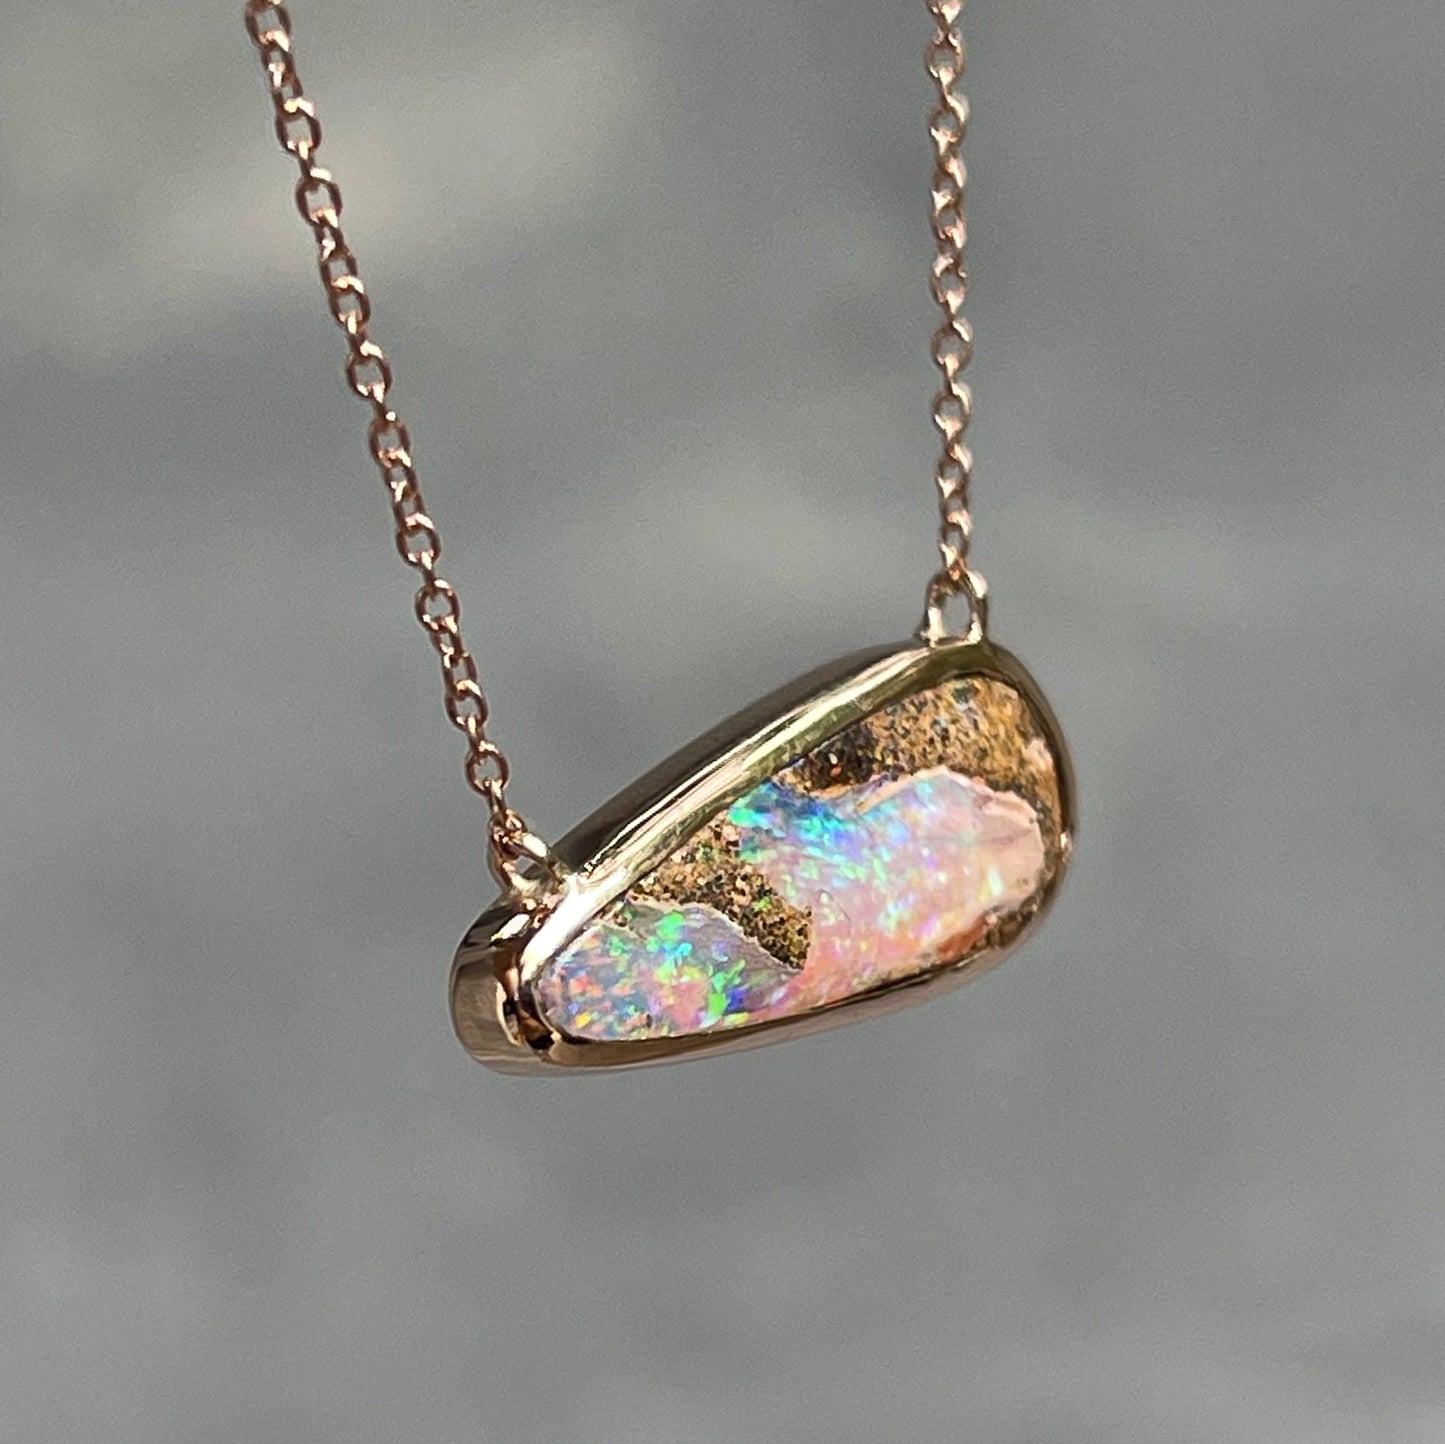 An angled shot of Australian Opal Necklace by NIXIN Jewelry showing the top of the bezel setting. The opal pendant in made in rose gold.